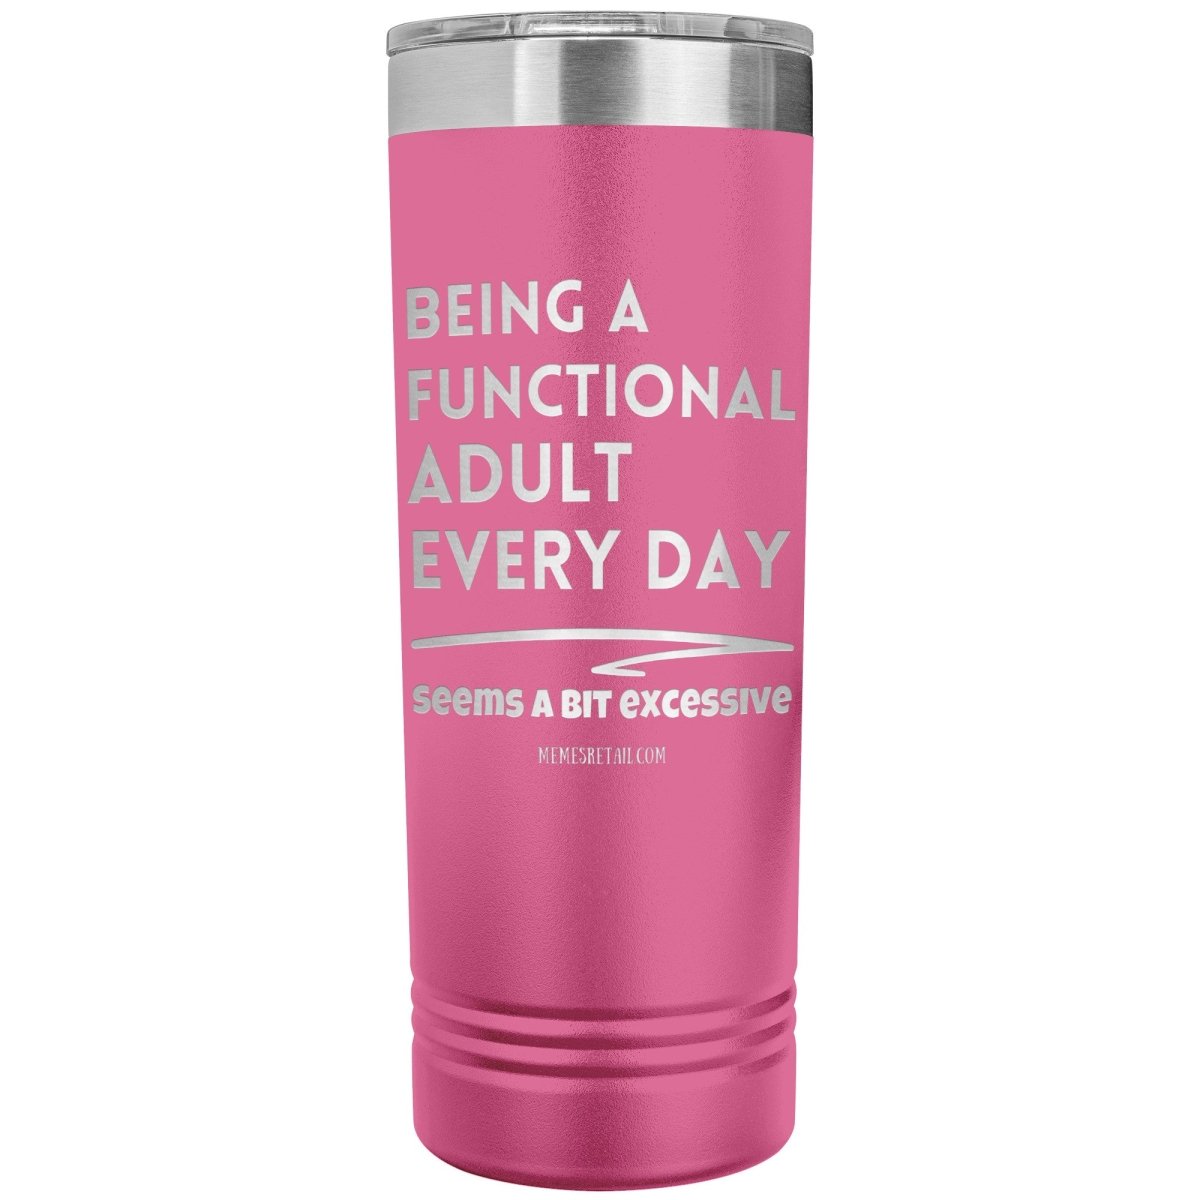 Being a Functional Adult Seems a bit excessive - Memes Retail